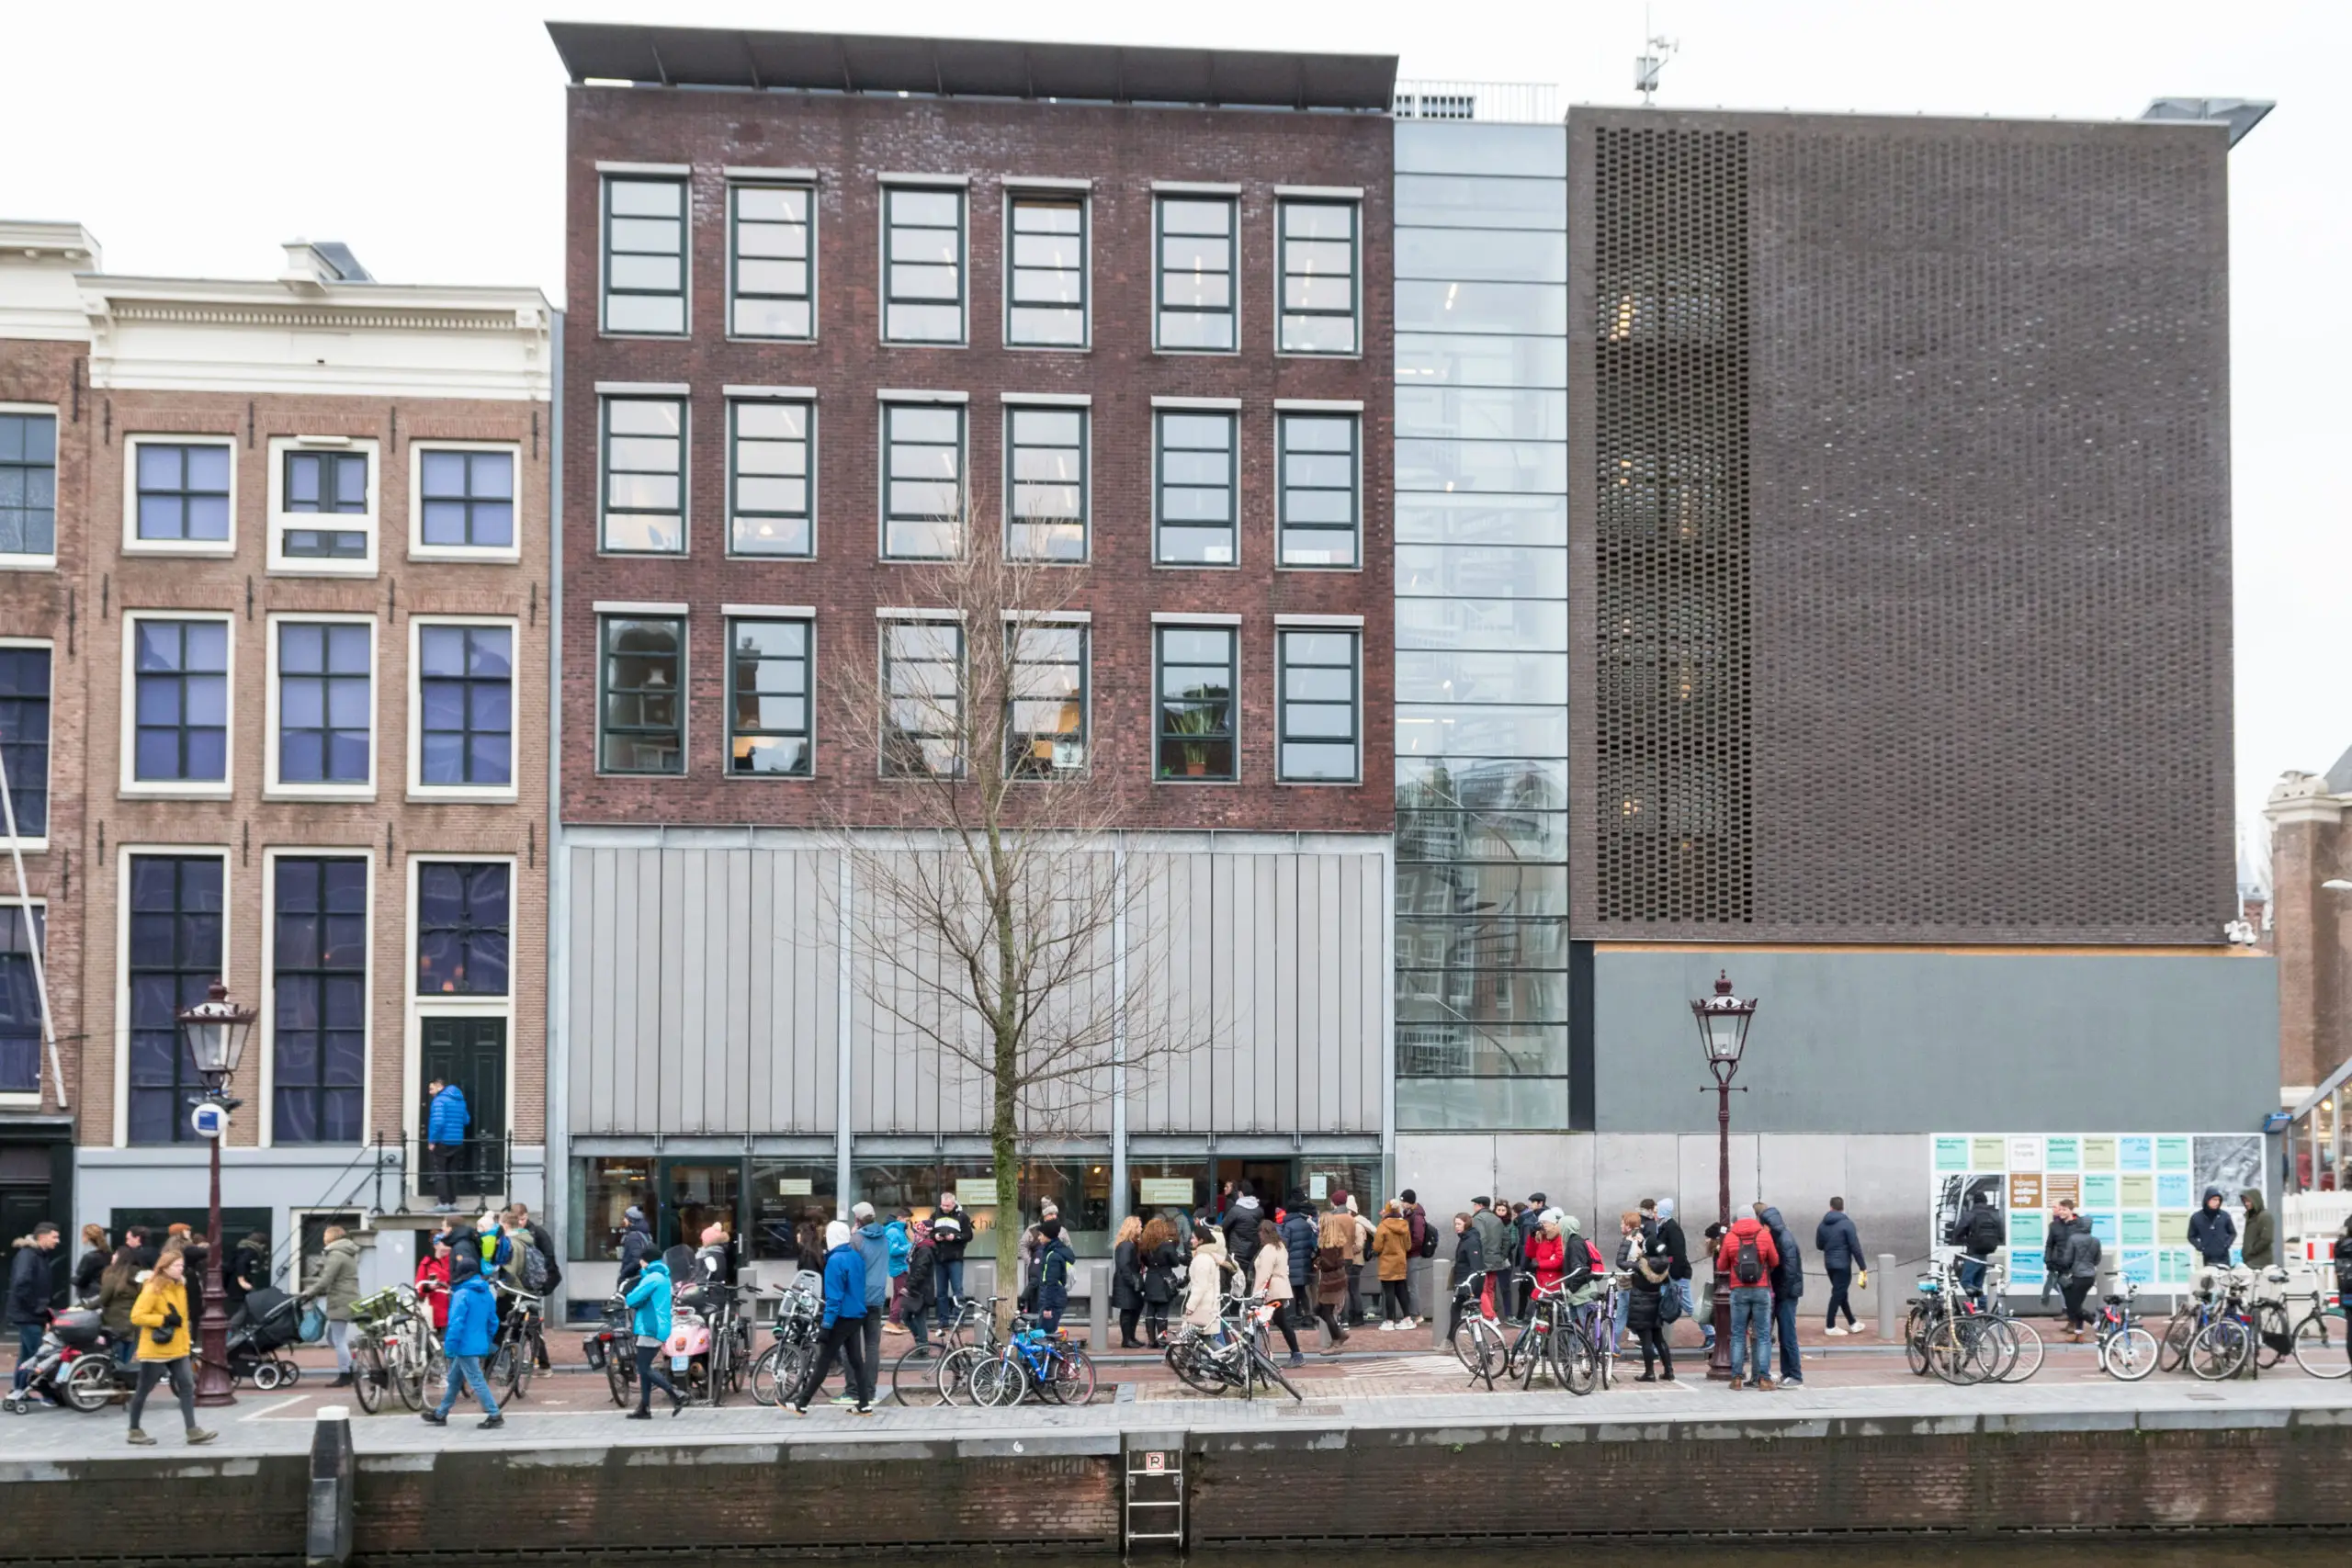 Information on Online Ticket Reservation for Anne Frank House in Amsterdam